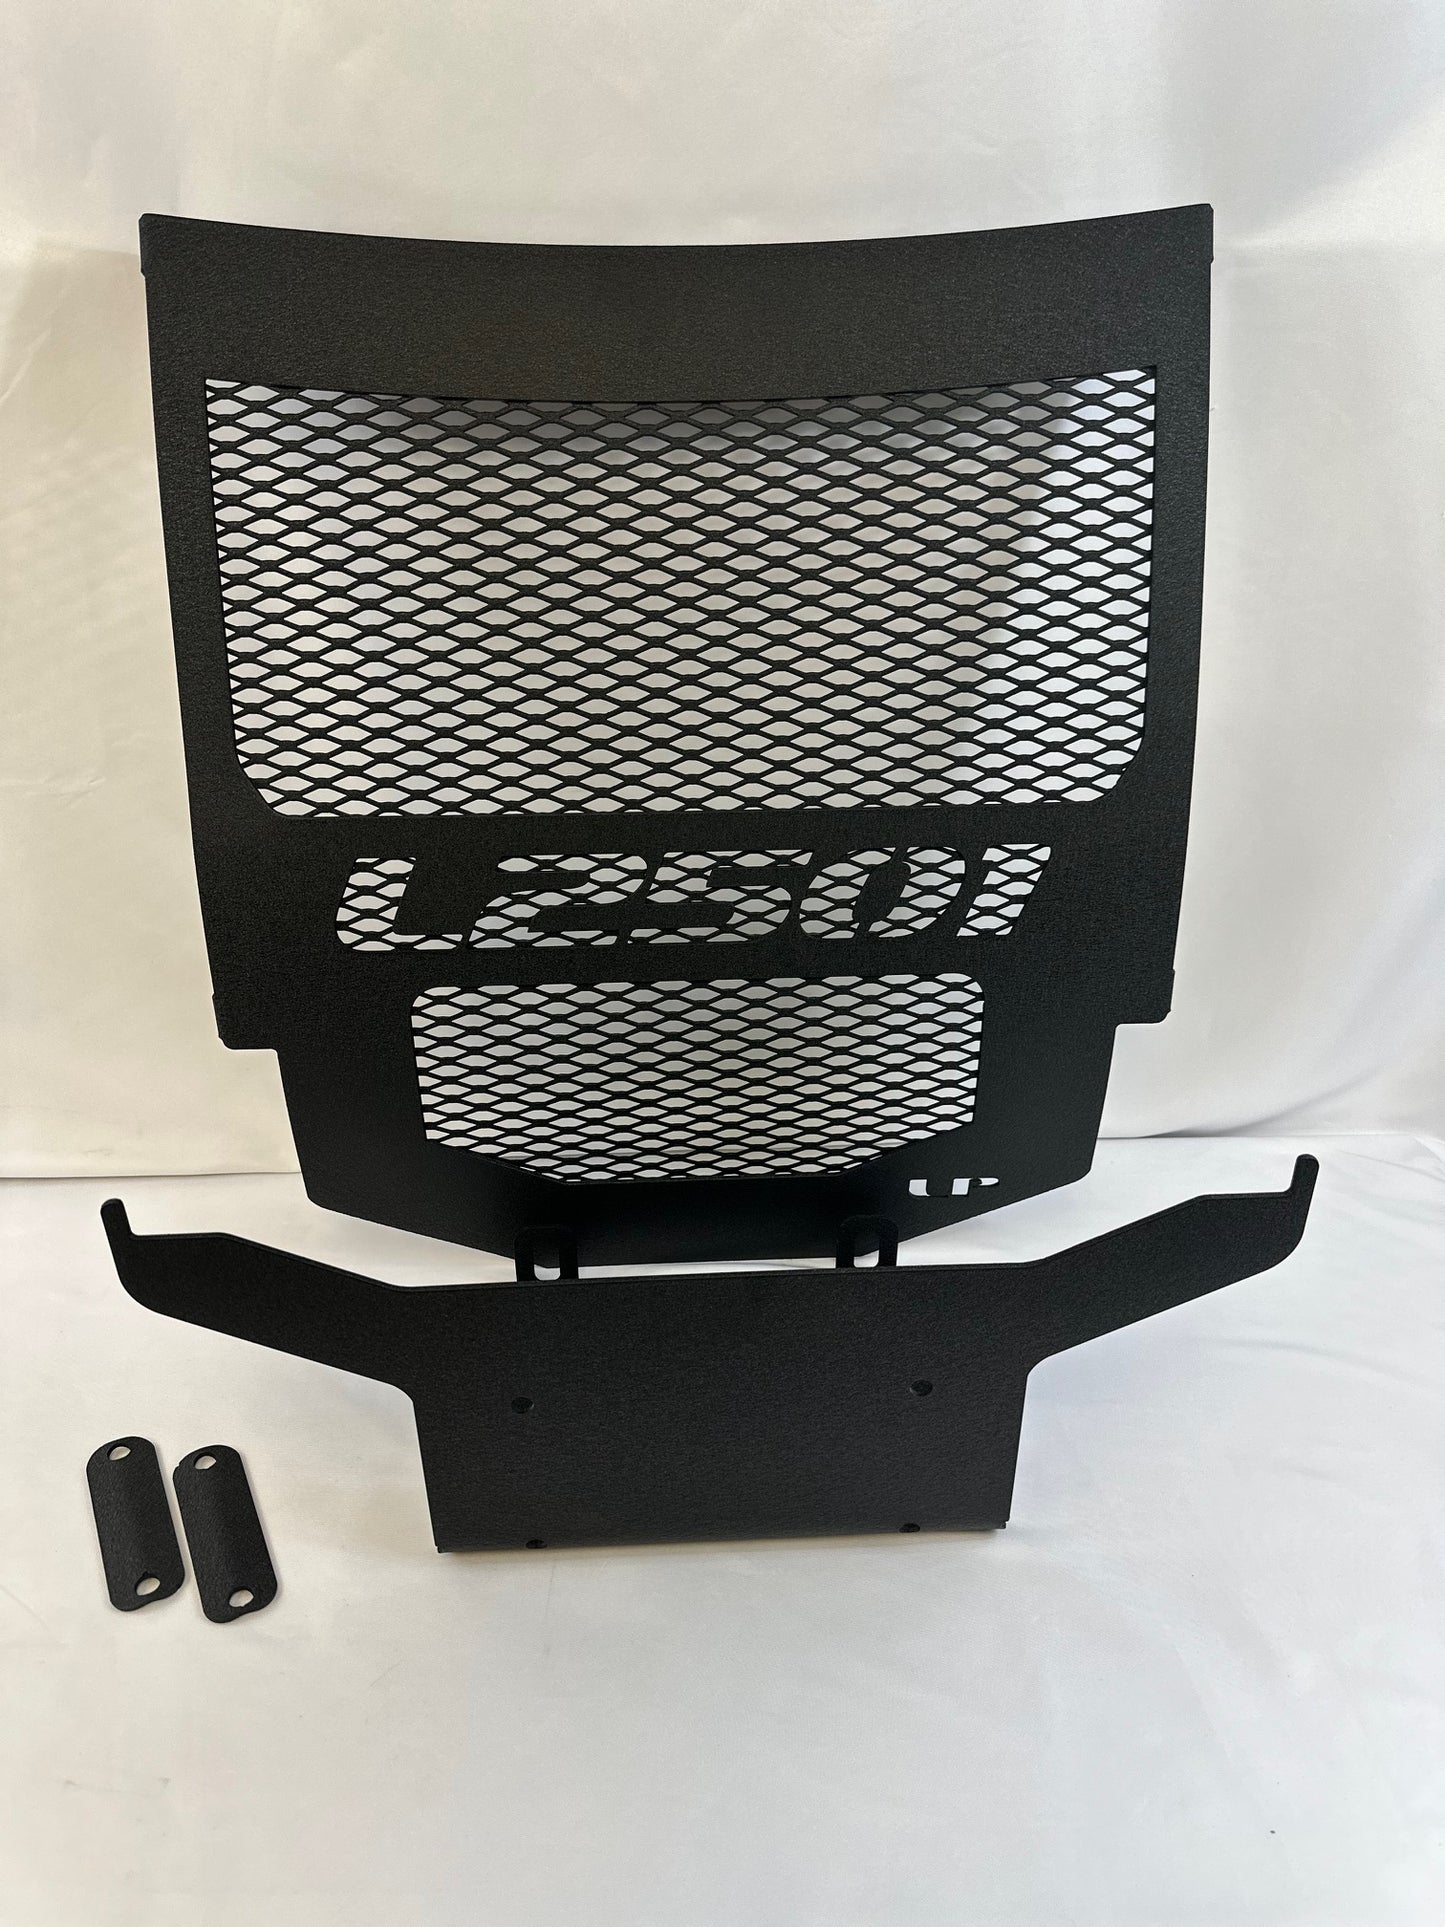 IN STOCK - L2501 Wrinkle Black Powder Coating Reinforced Mesh Grille Guard with Chin Guard